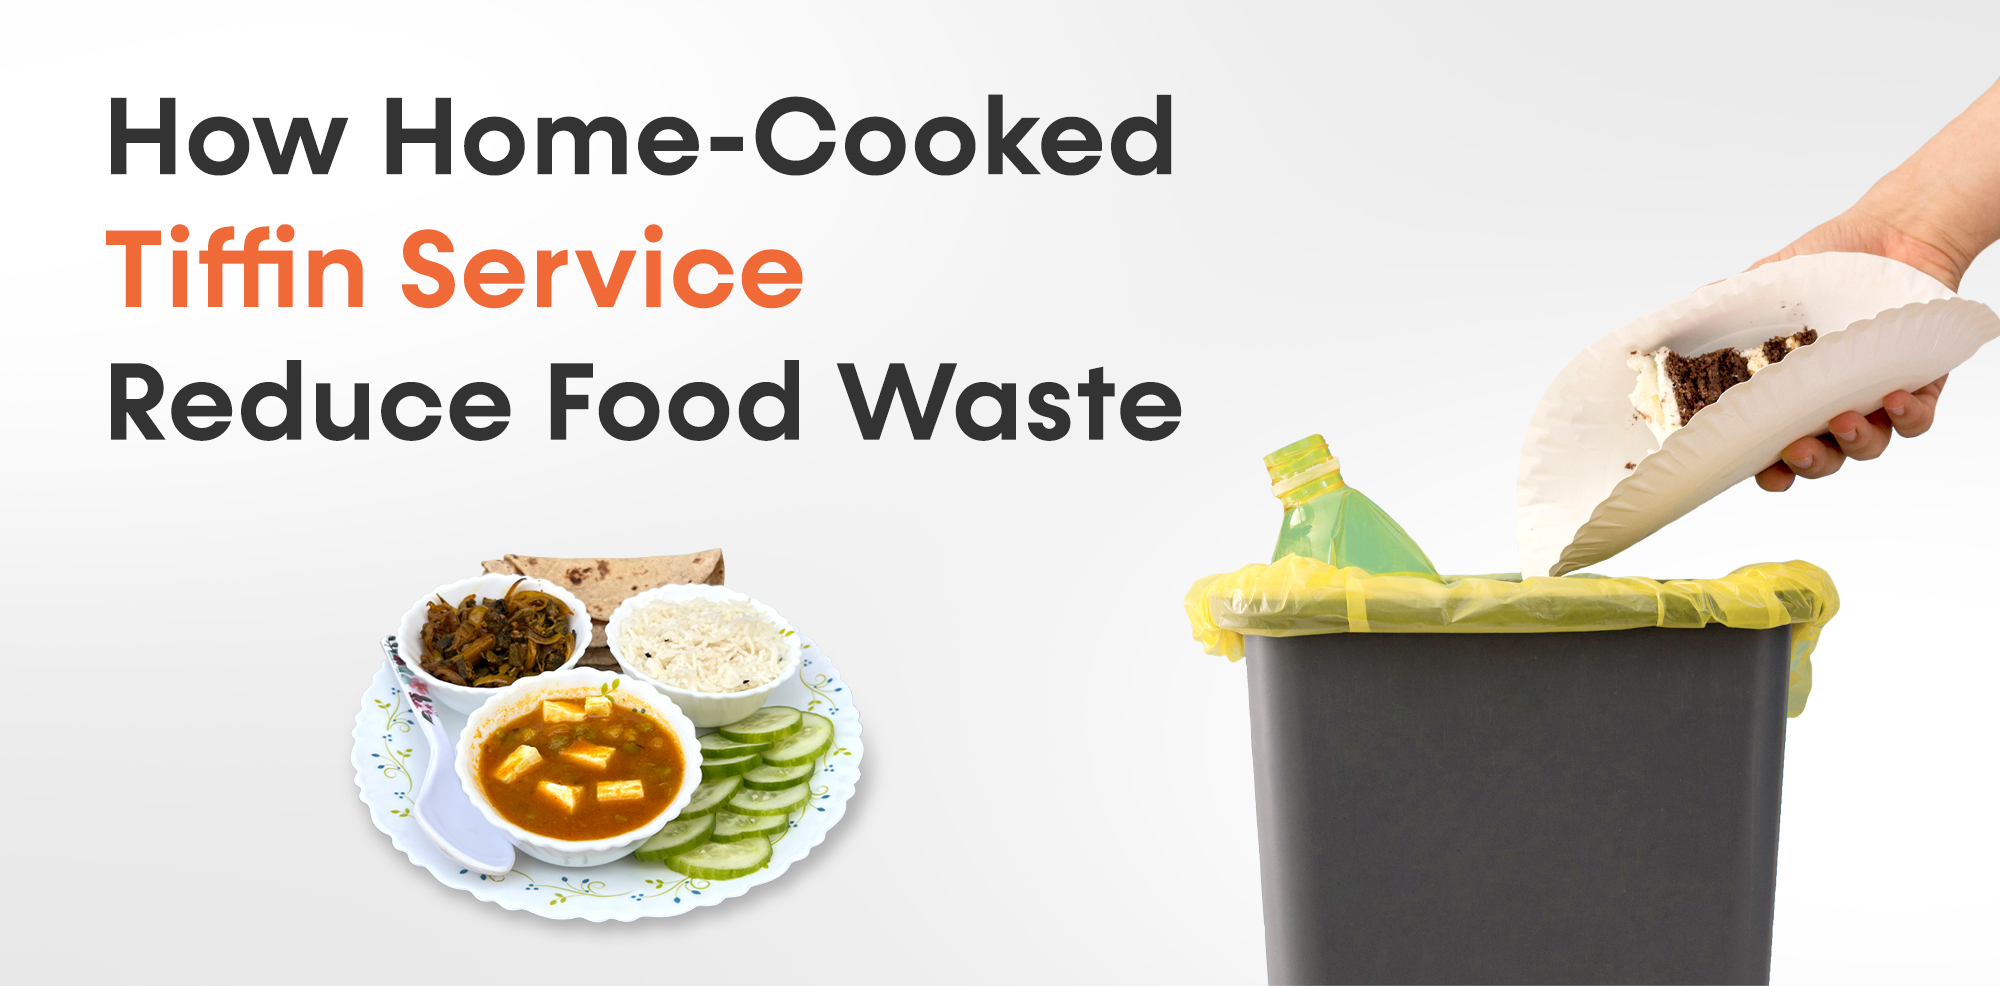 How Home-Cooked Tiffin Service Reduce Food Waste